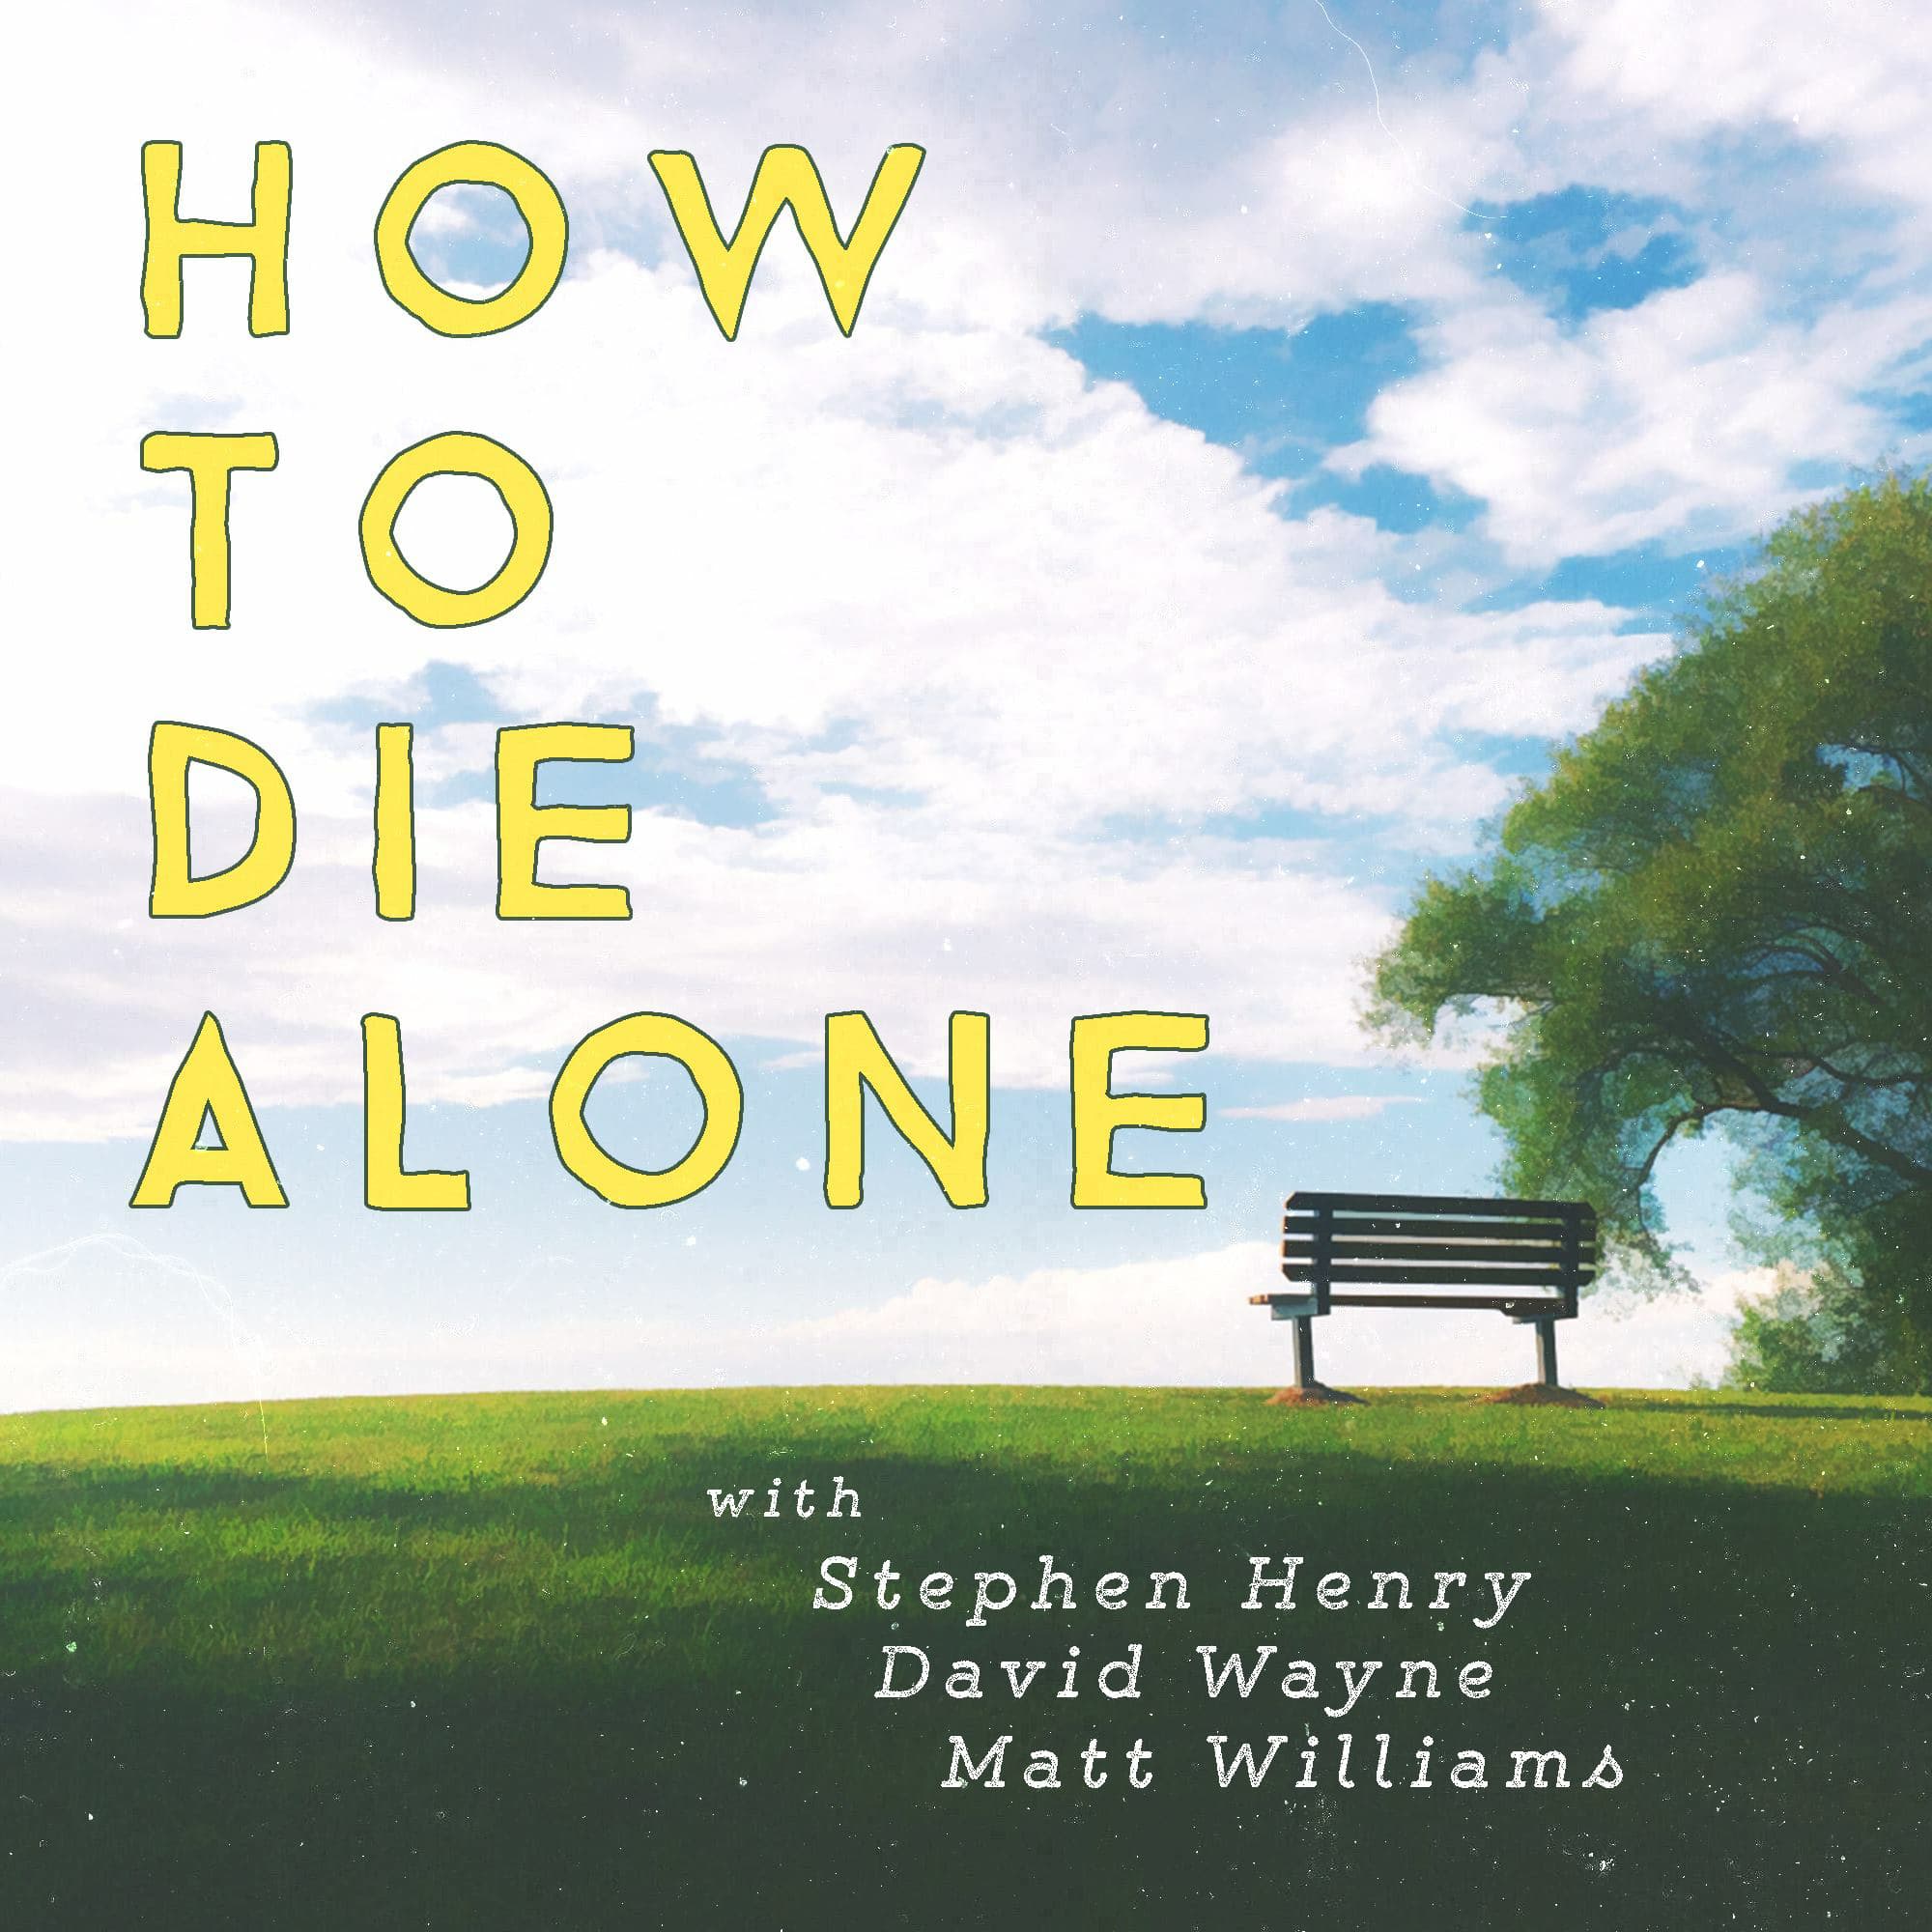  How to Die Alone - Episode 35 - Gape Show Network